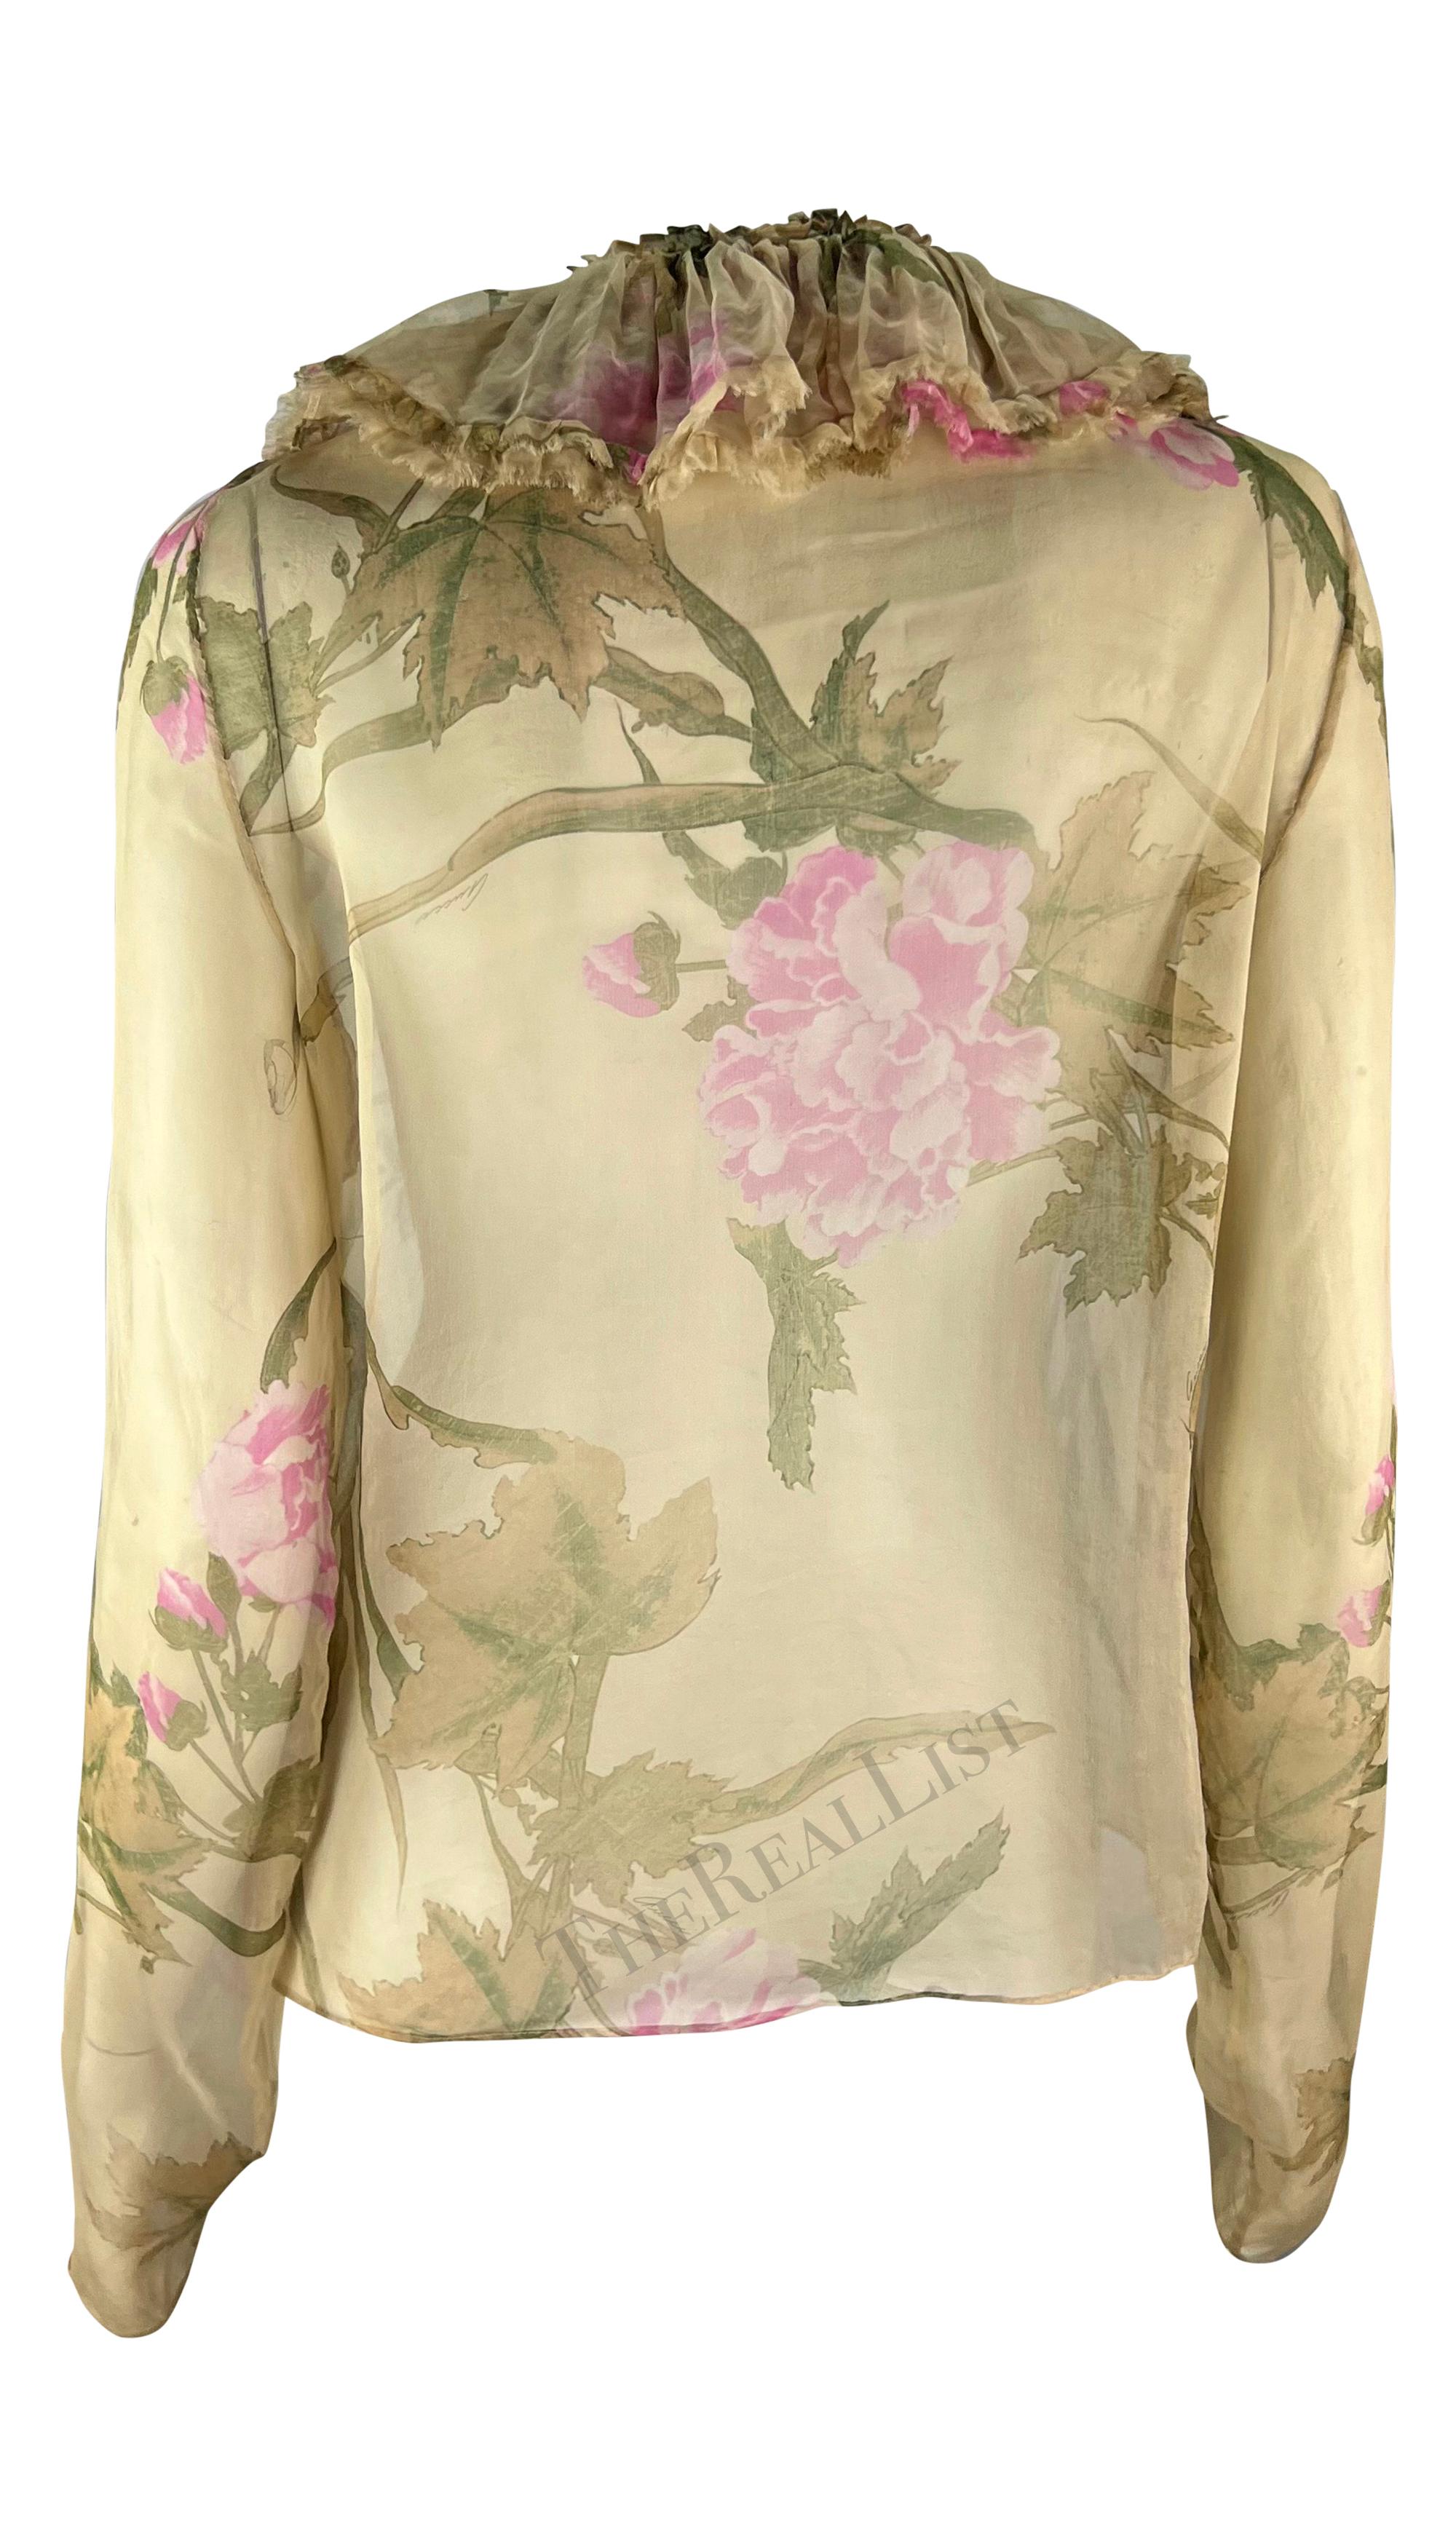 S/S 2003 Gucci by Tom Ford Tan Sheer Floral Ruffle Plunging Top For Sale 1